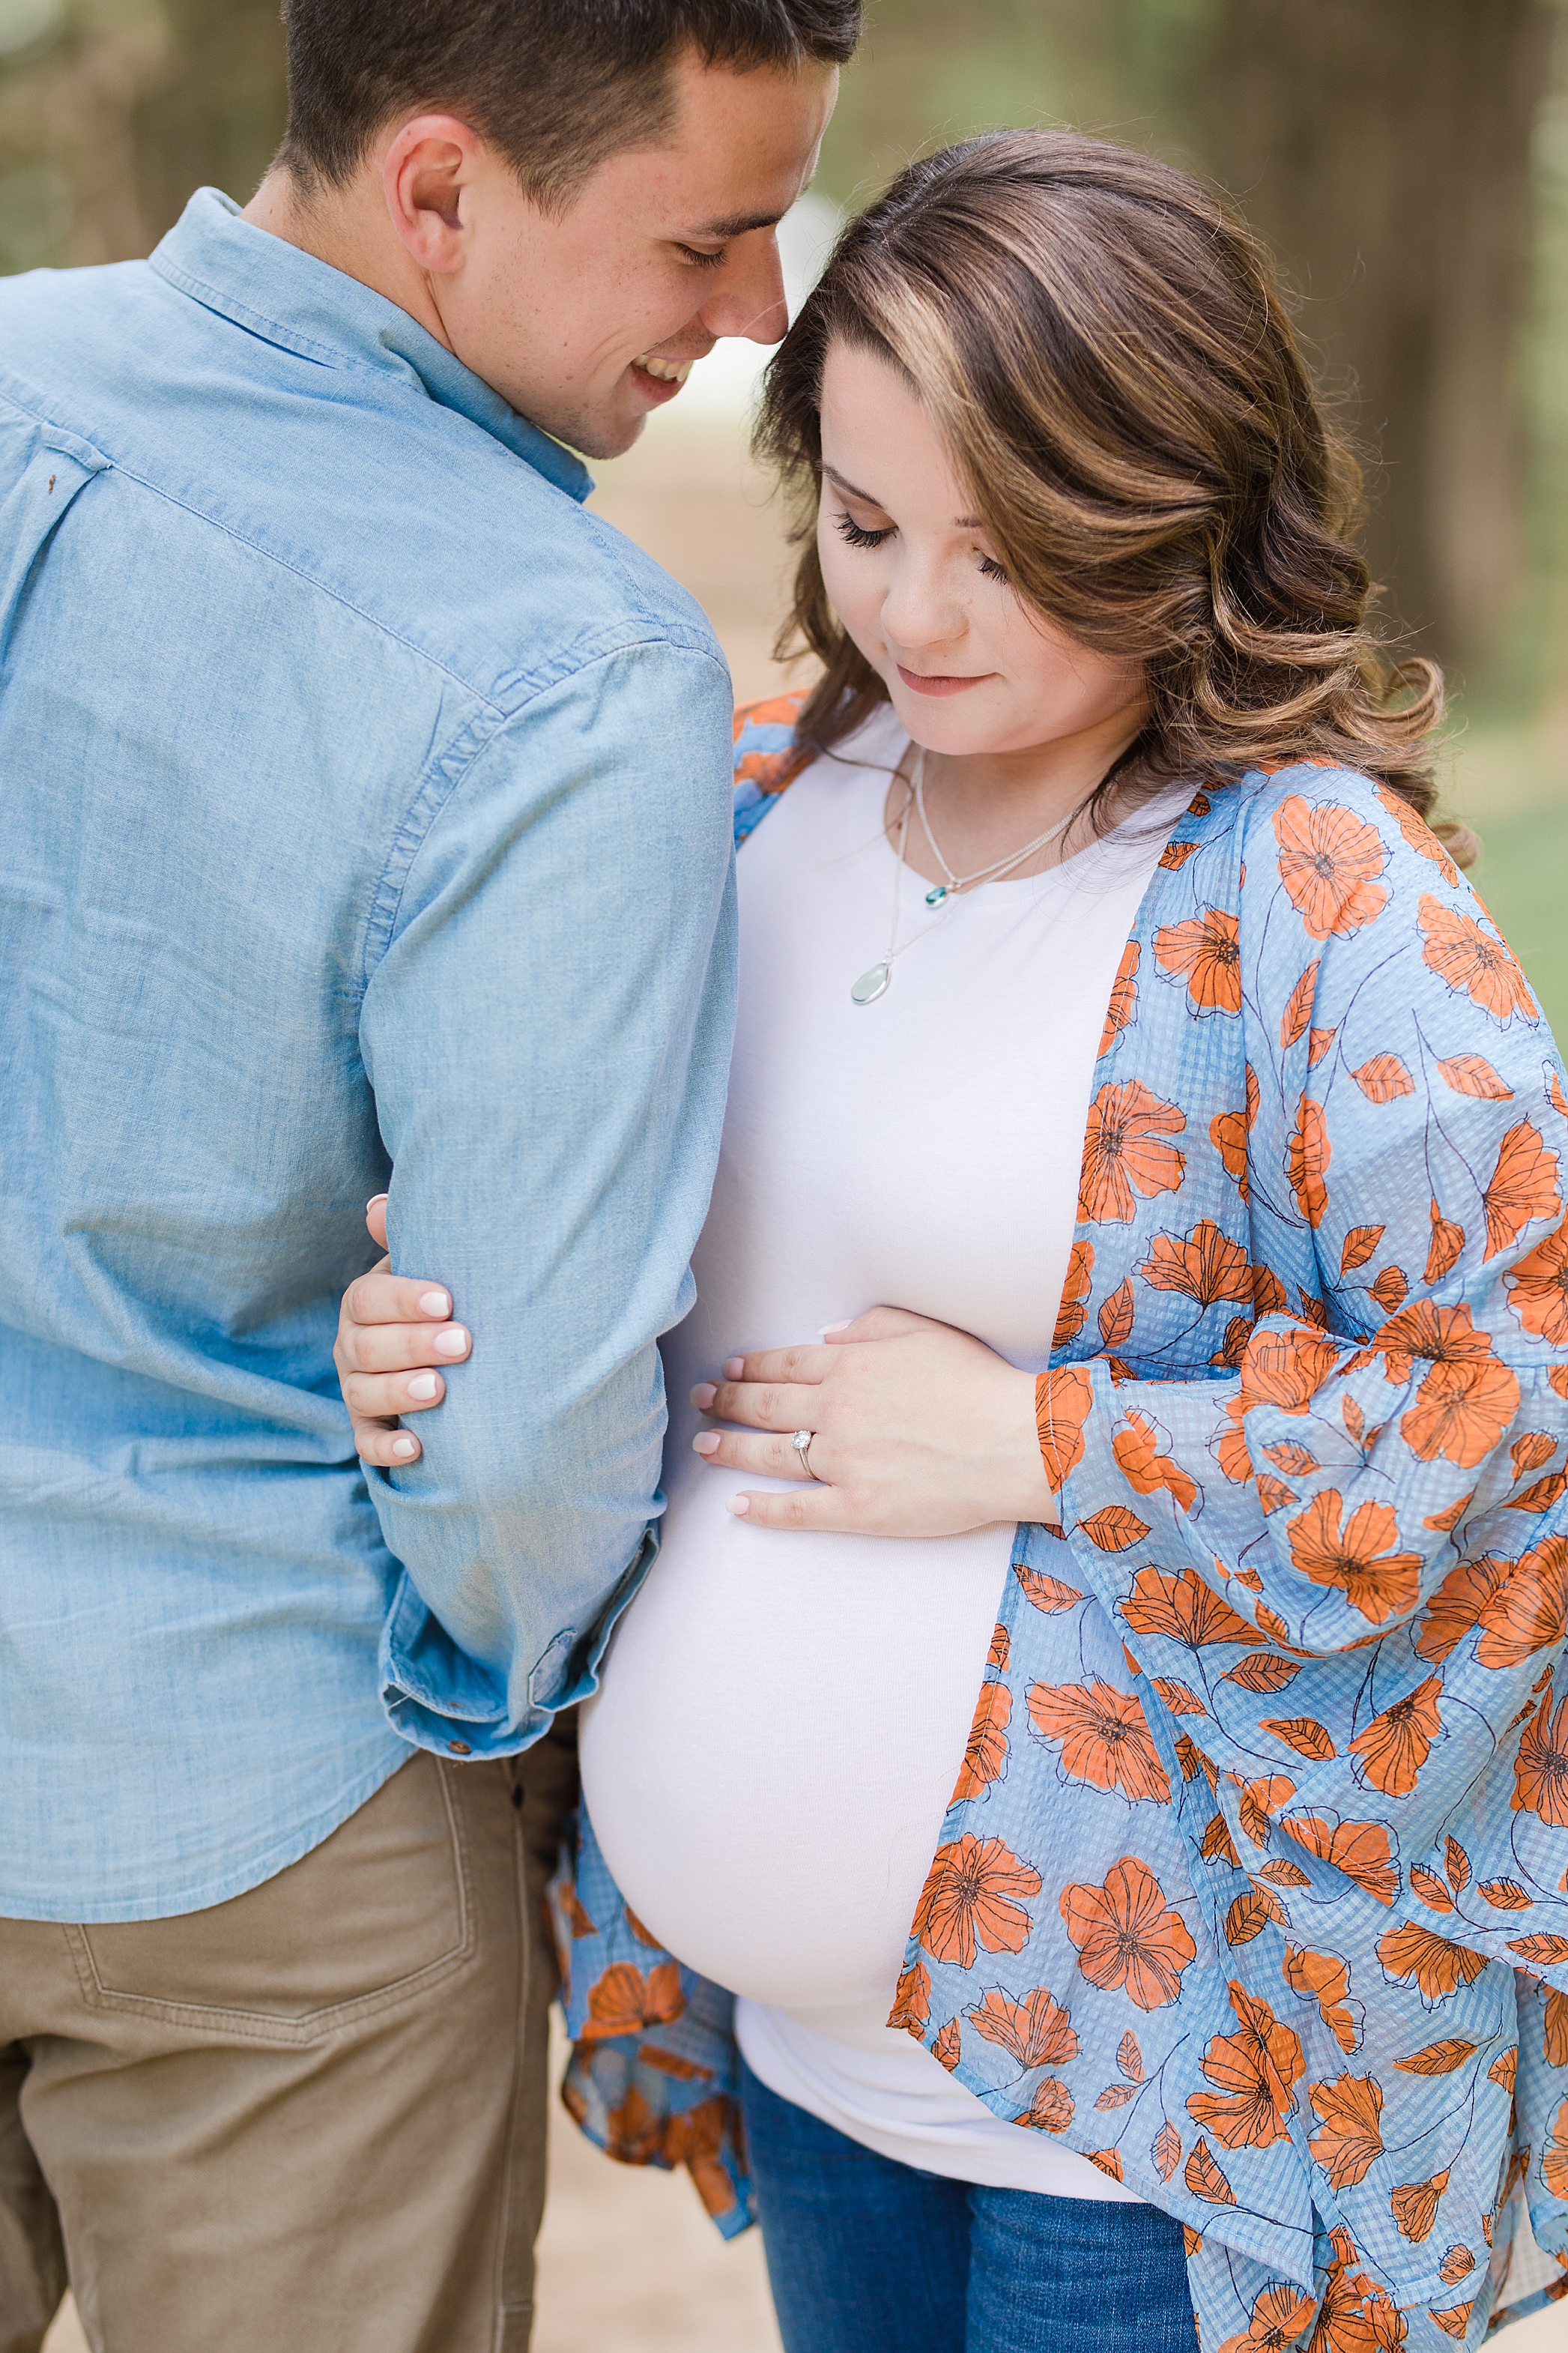 Maternity Session at Chapman State Park by Costola Photography